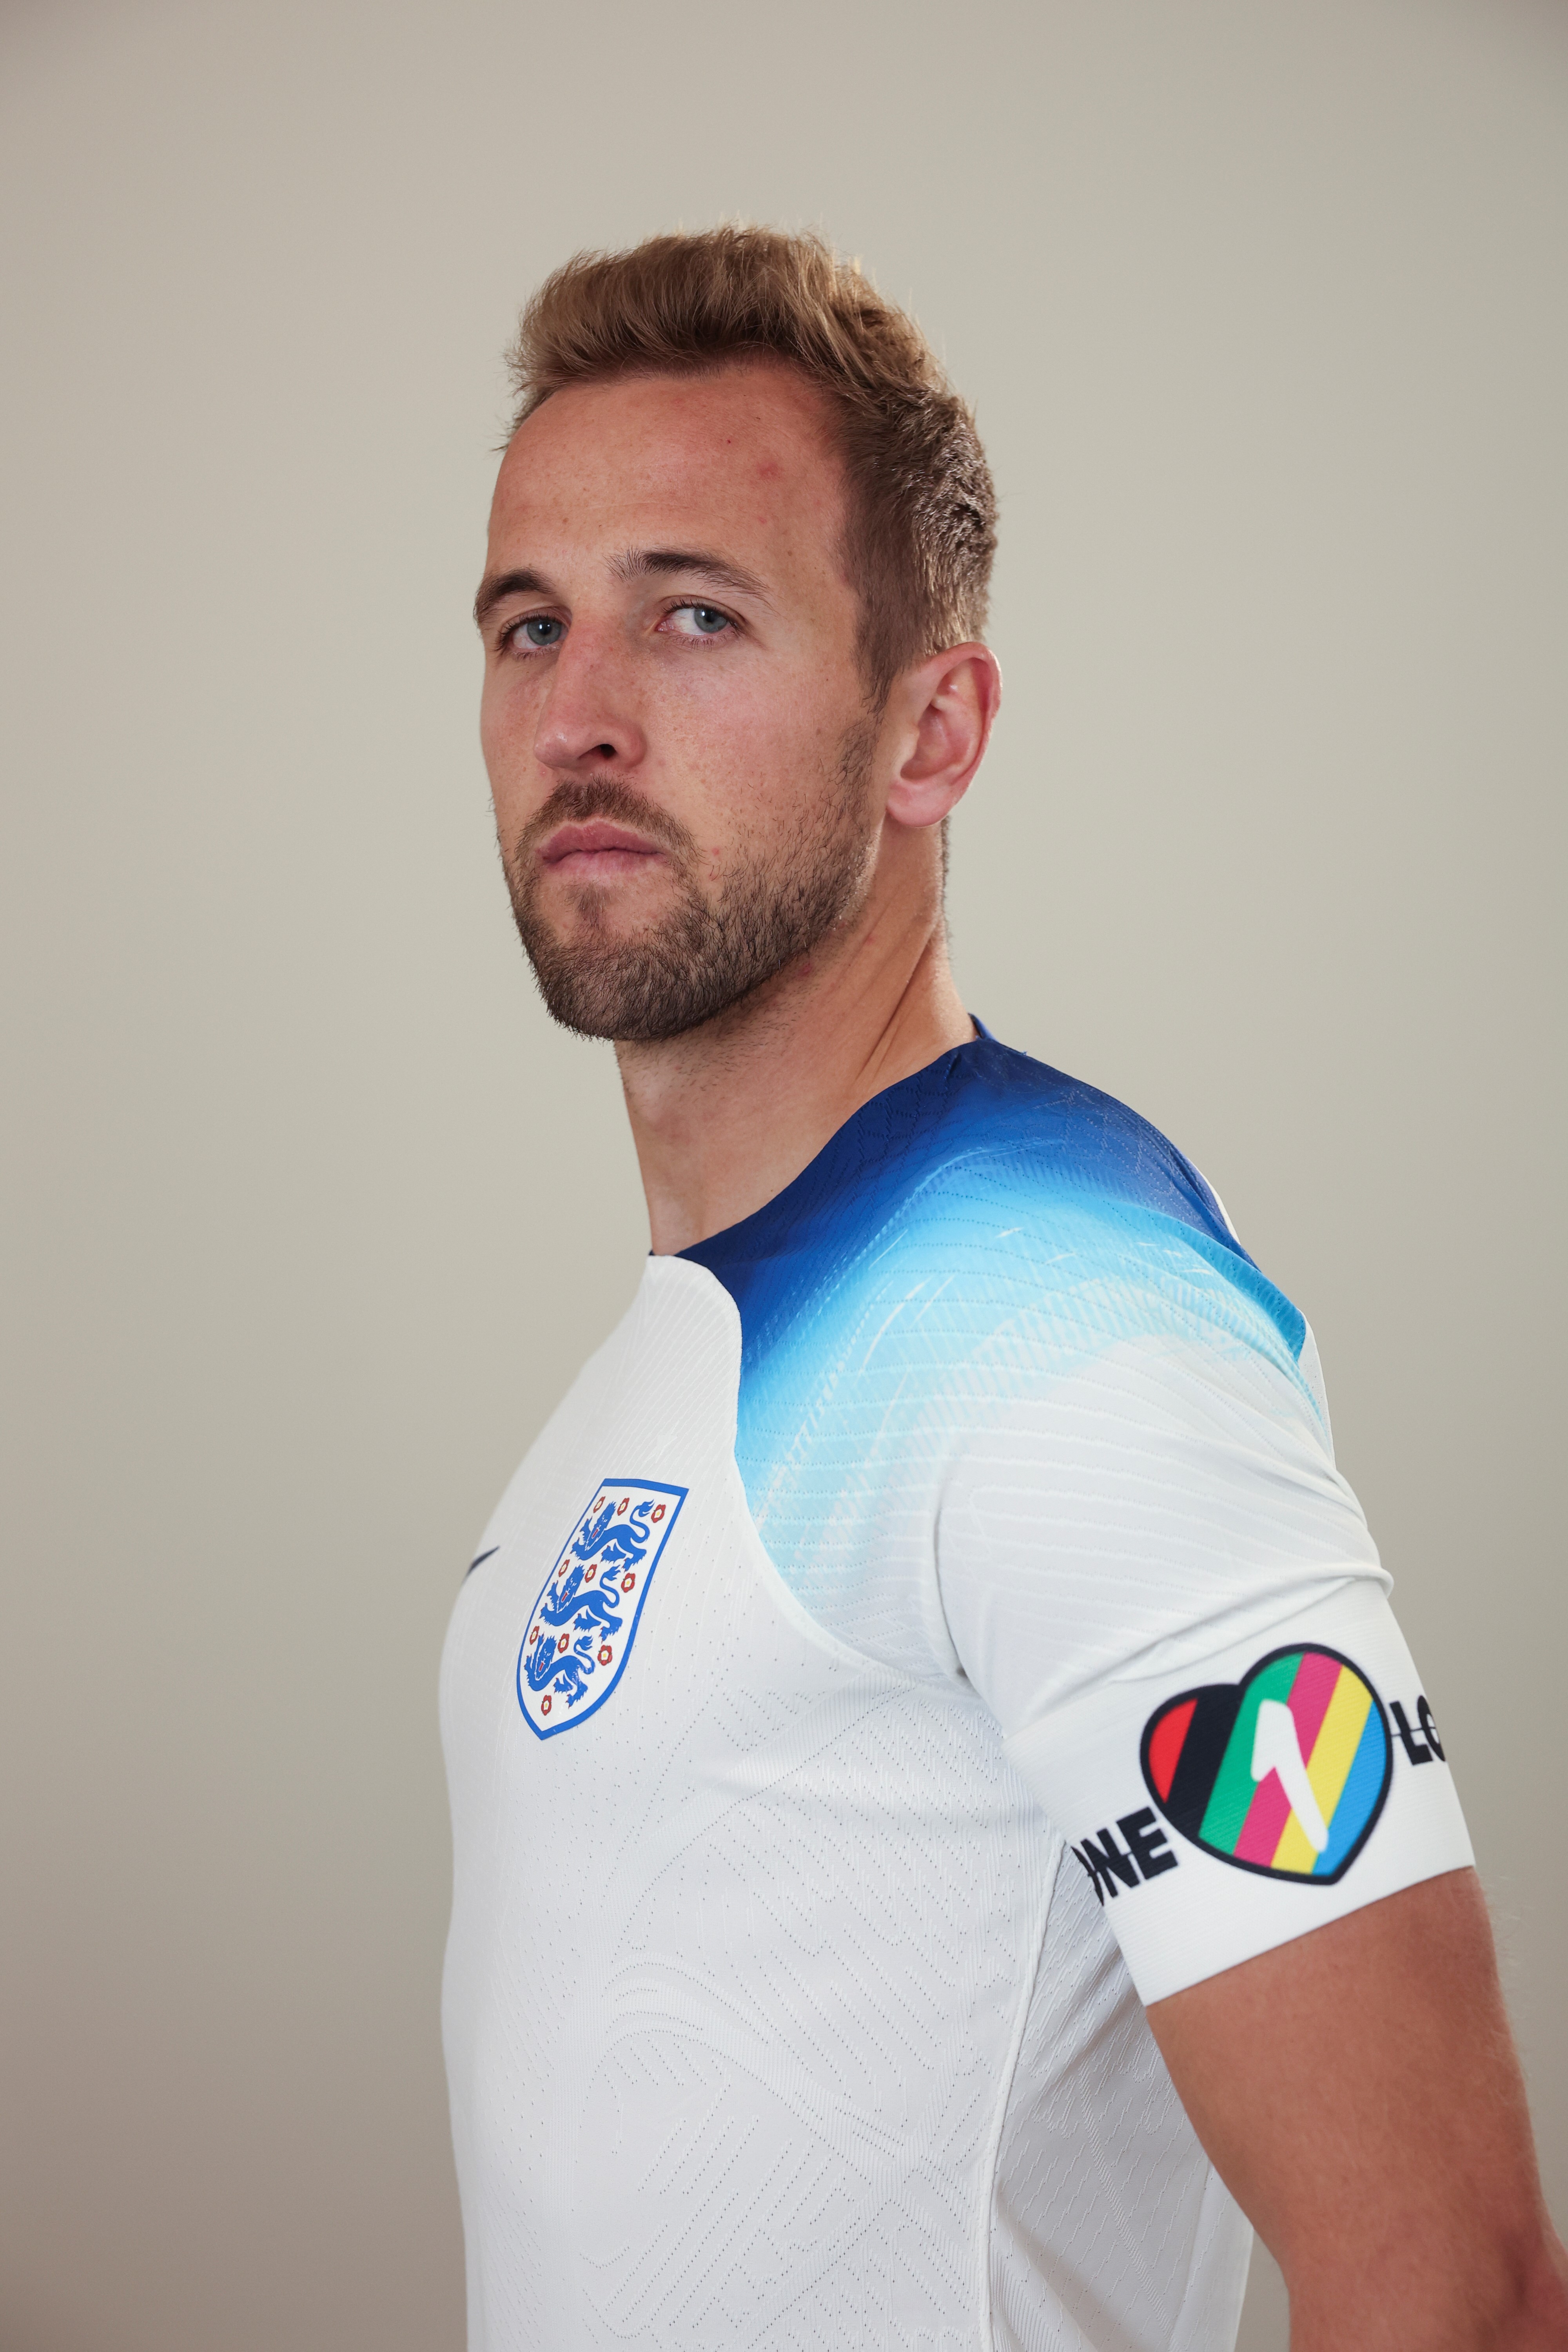 Harry Kane wearing the OneLove armband as part of an anti-discrimination campaign